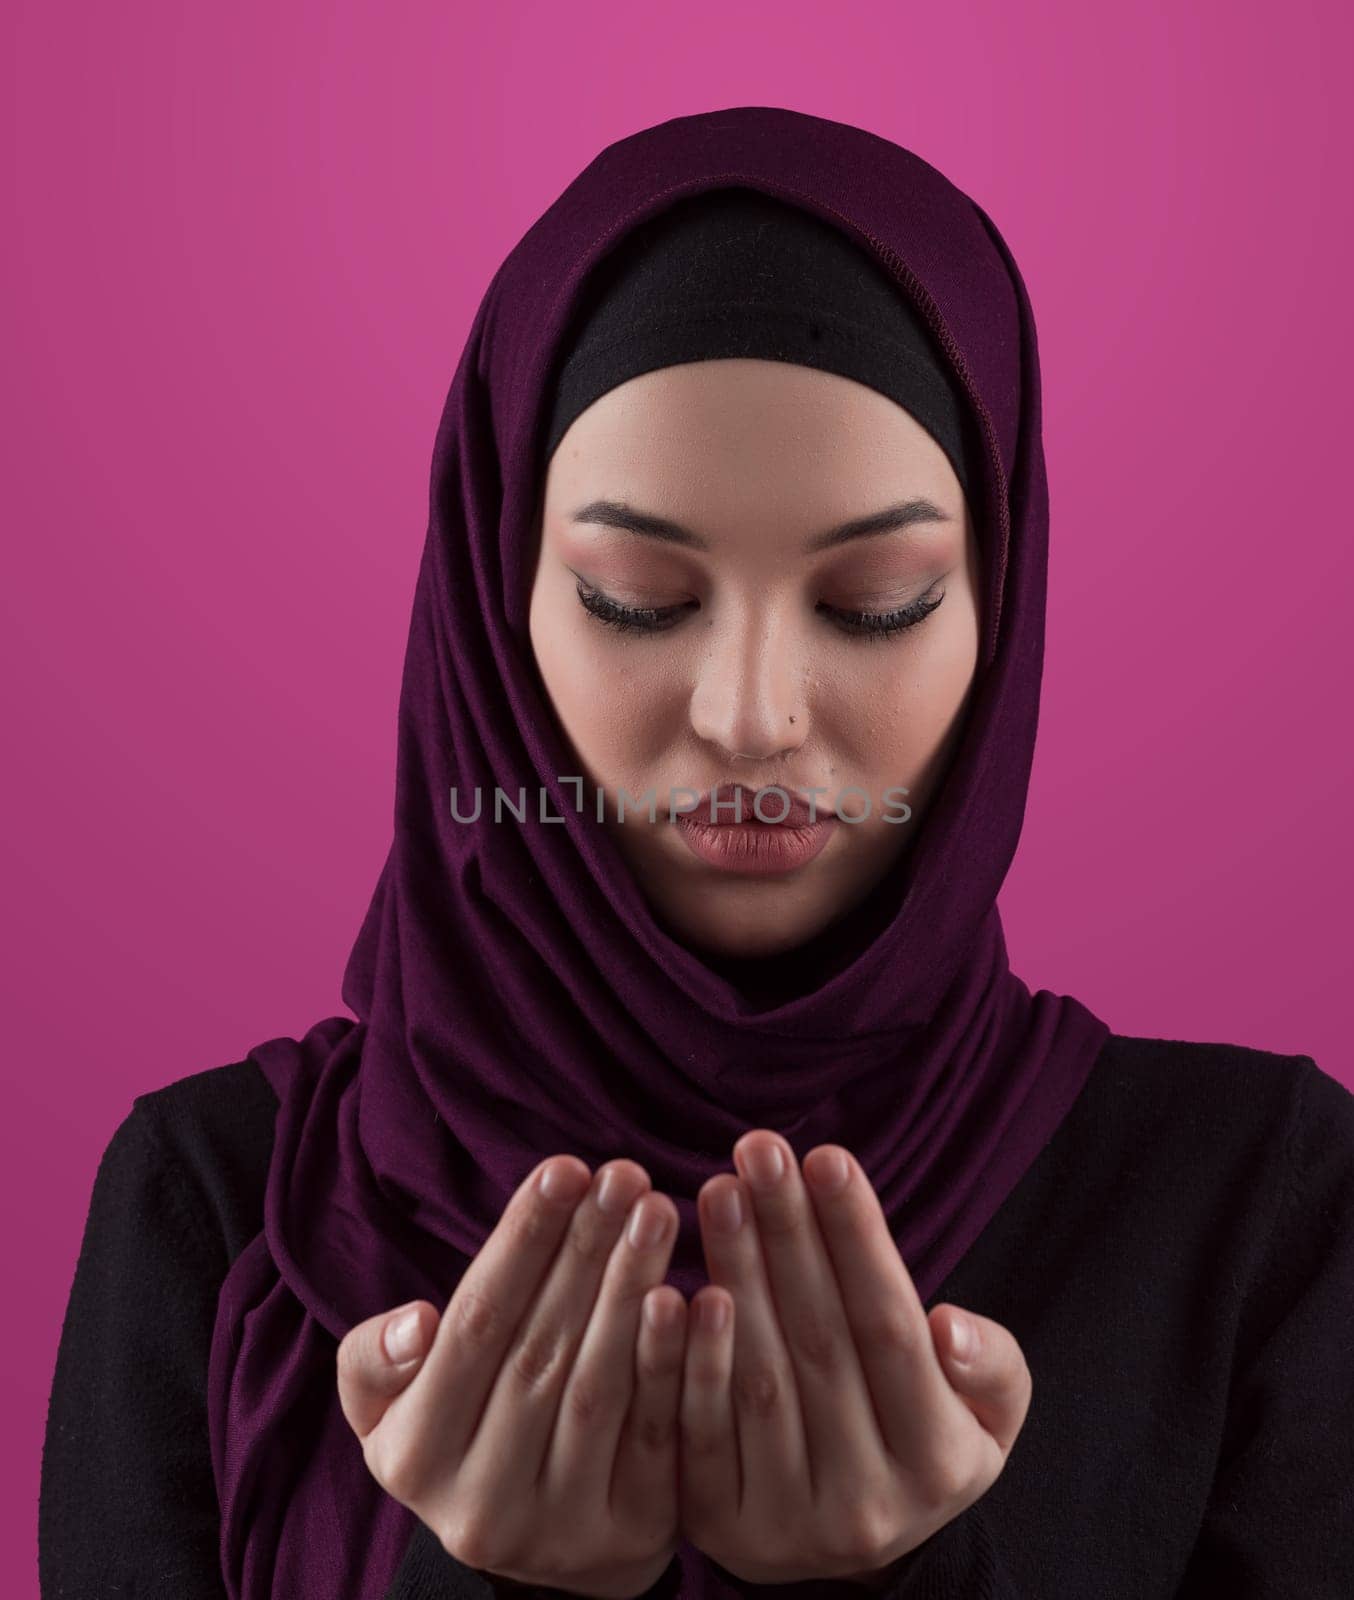 Muslim woman in hijab and traditional clothes praying for Allah, copy space. Muslim woman with hijab praying indoor pink background. High quality photo